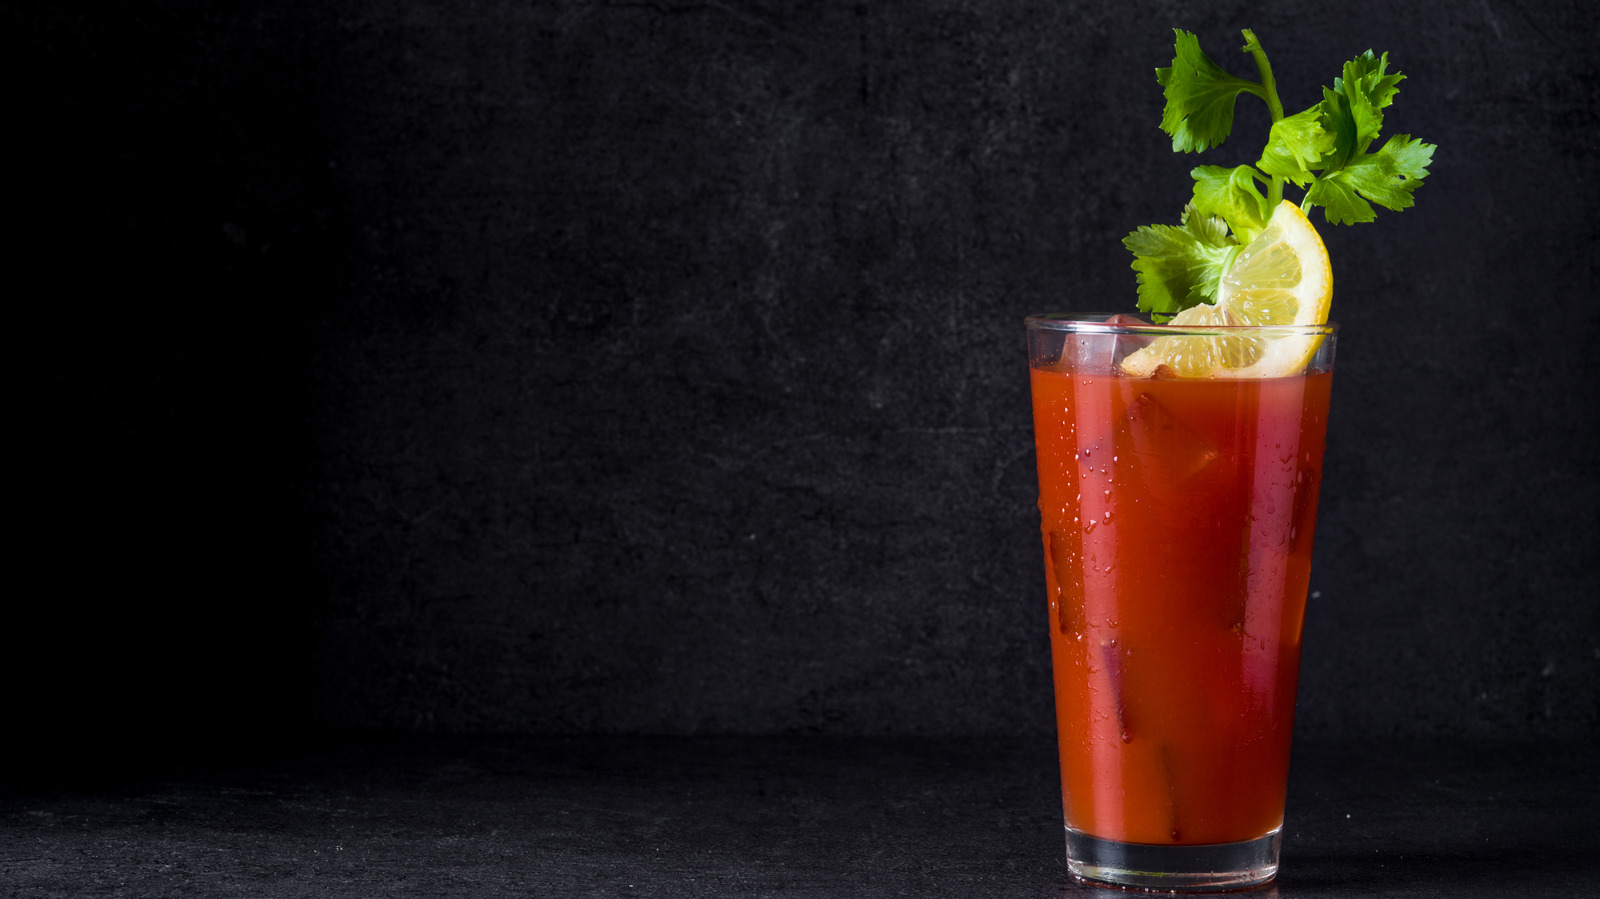 https://www.tastingtable.com/img/gallery/the-real-purpose-of-adding-lemon-to-a-bloody-mary/l-intro-1660333639.jpg